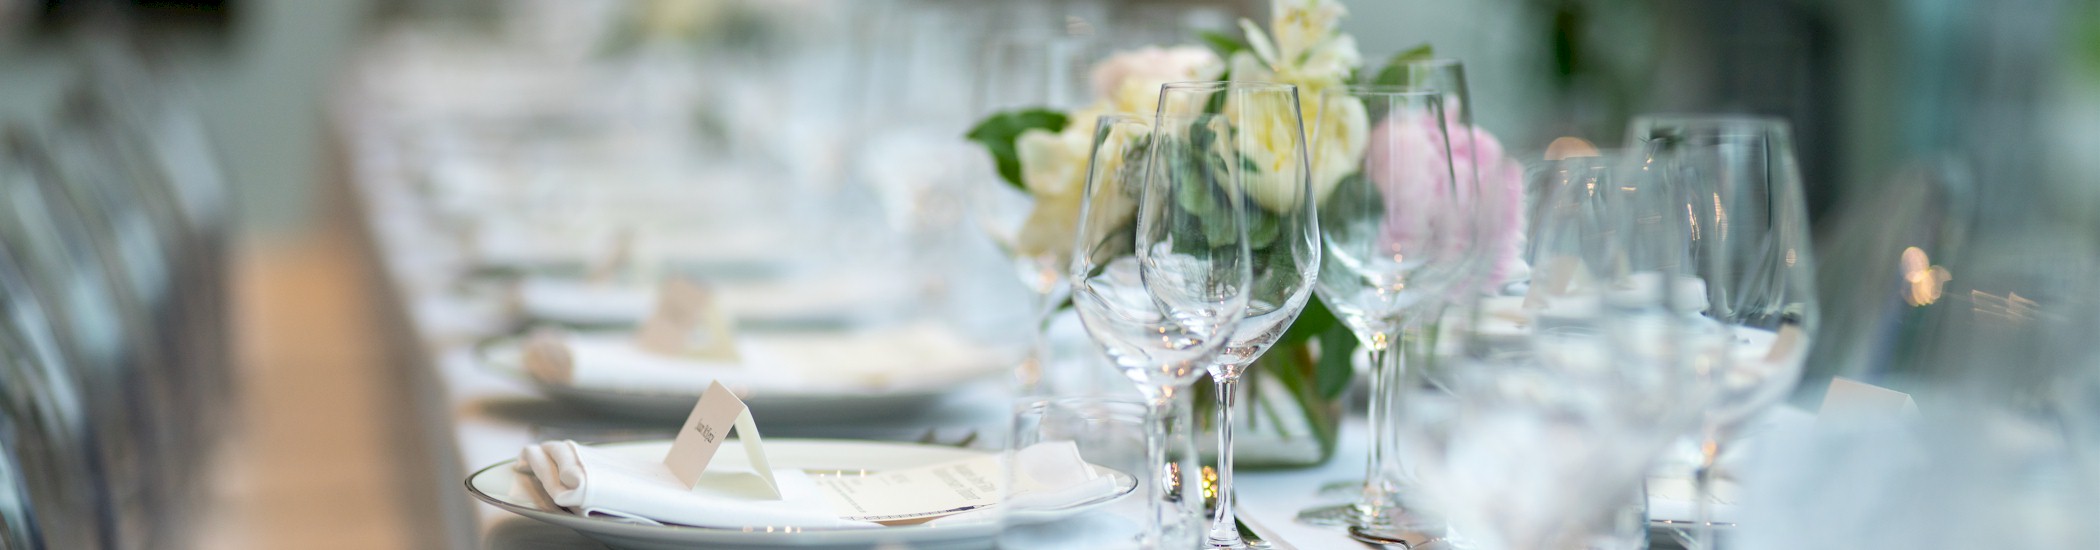 A table covered with a white cloth is set with an array of glasses and flowers